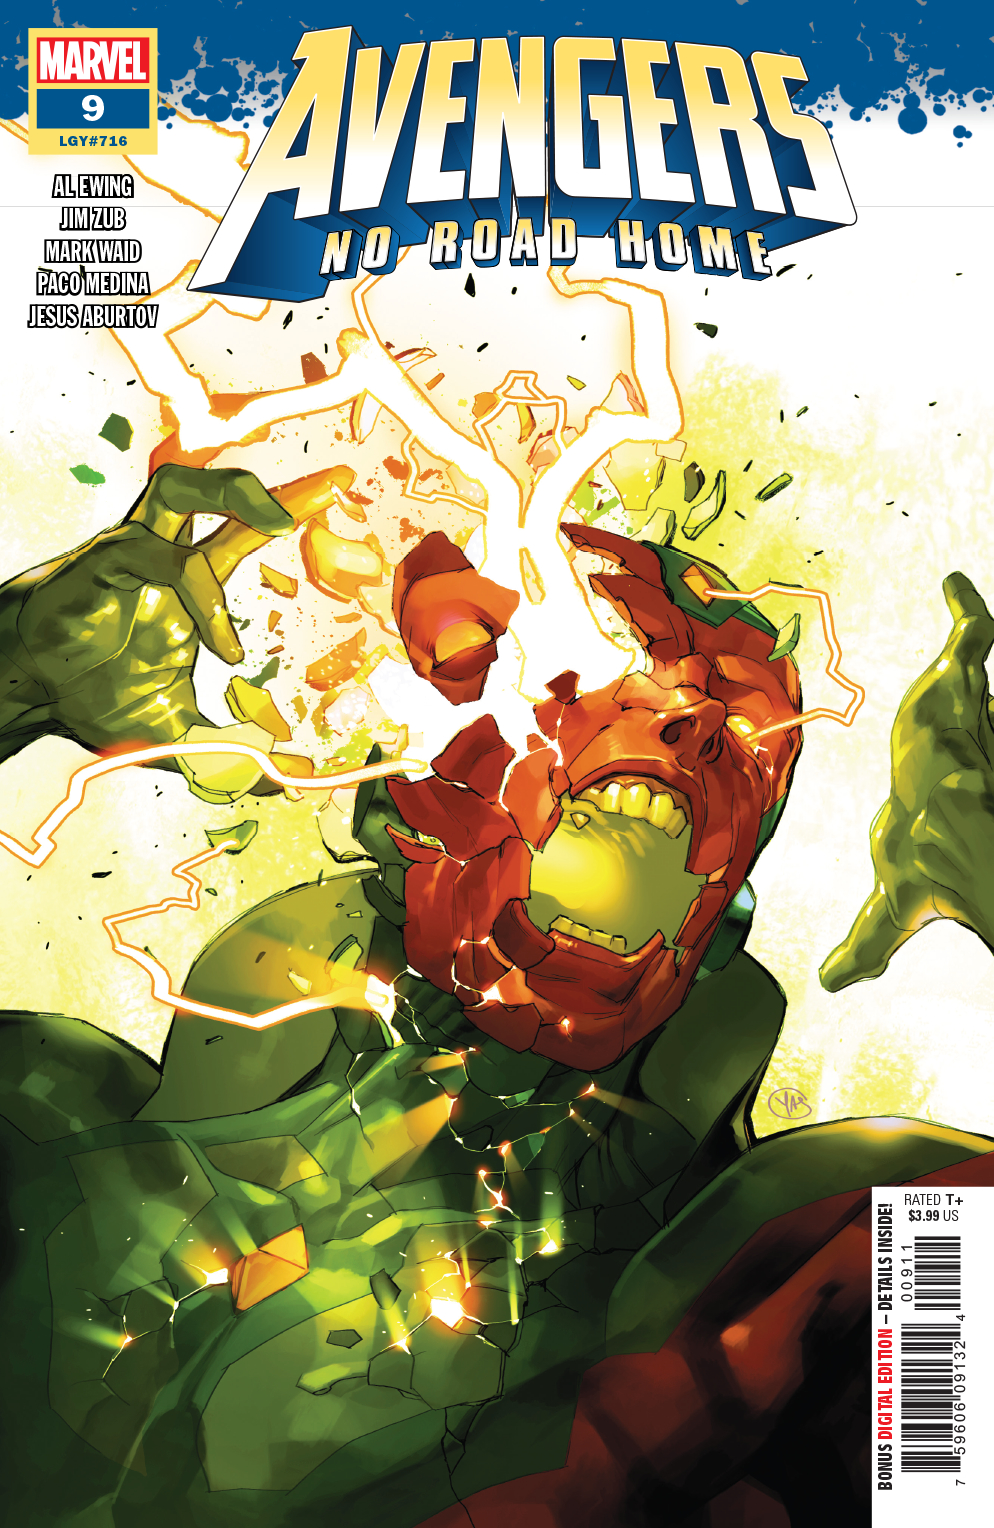 AVENGERS NO ROAD HOME #9 (OF 10)